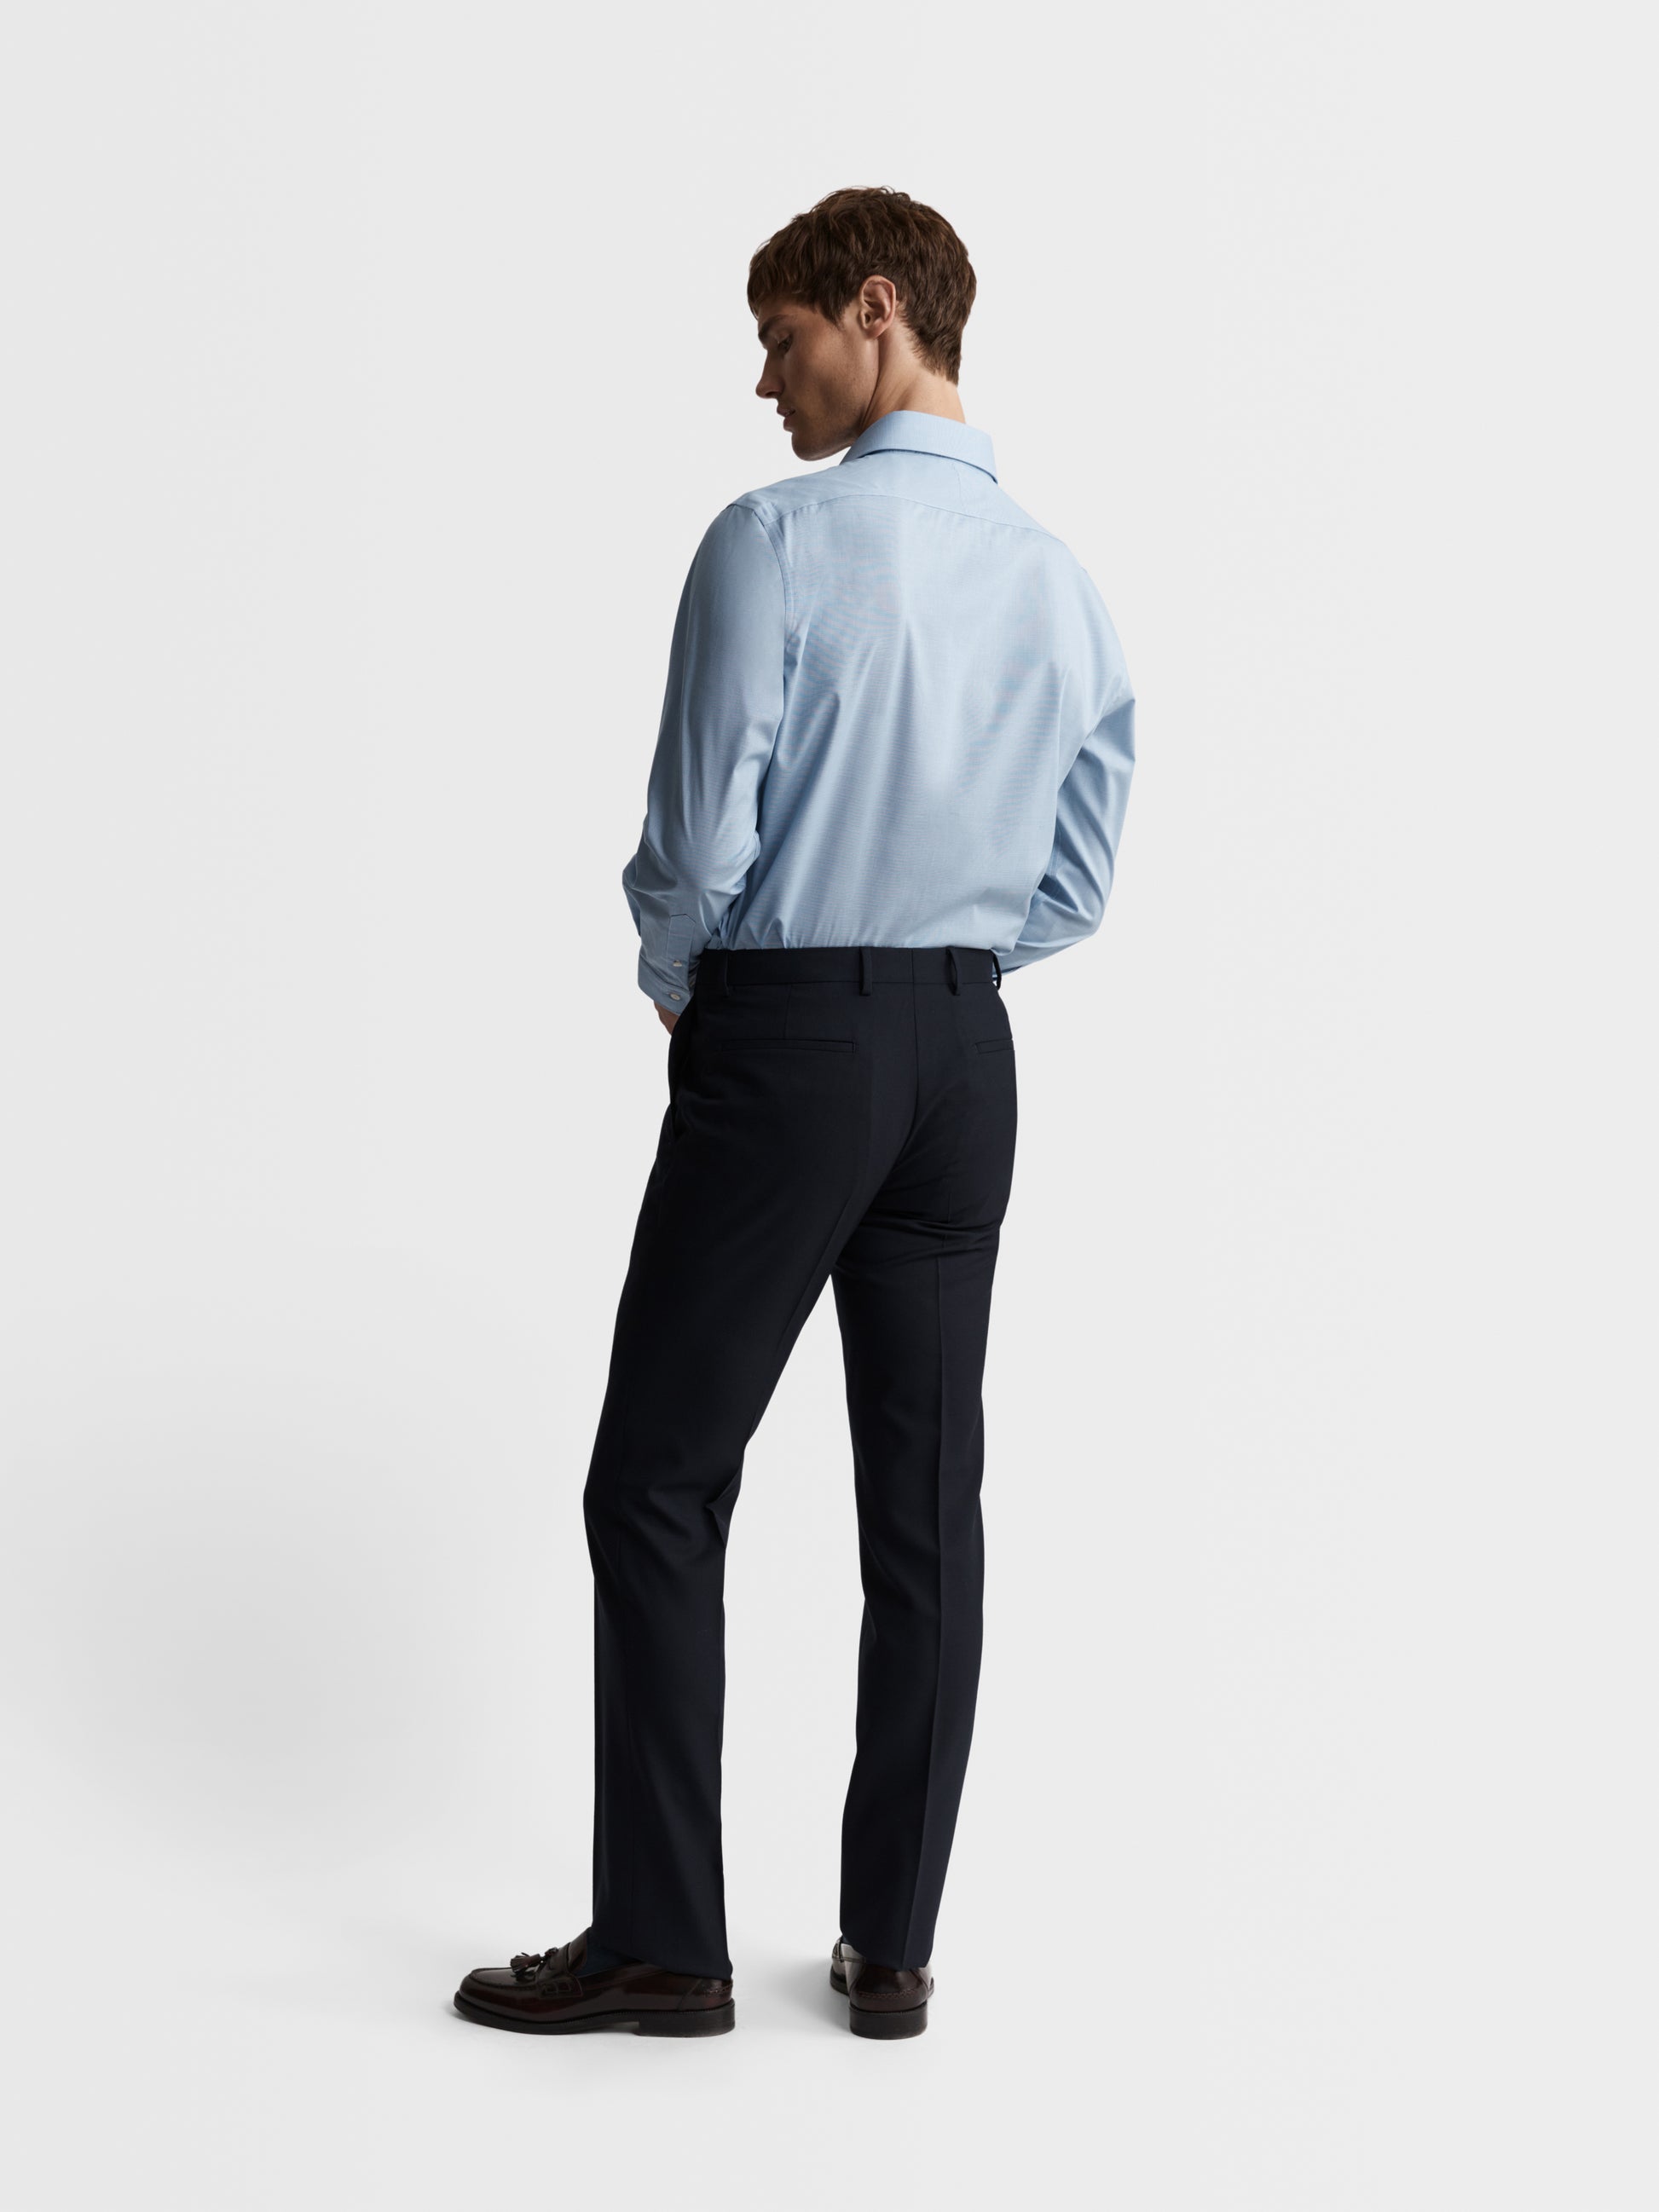 Image 5 of Max Performance Blue Puppytooth Plain Weave Slim Fit Single Cuff Classic Collar Shirt